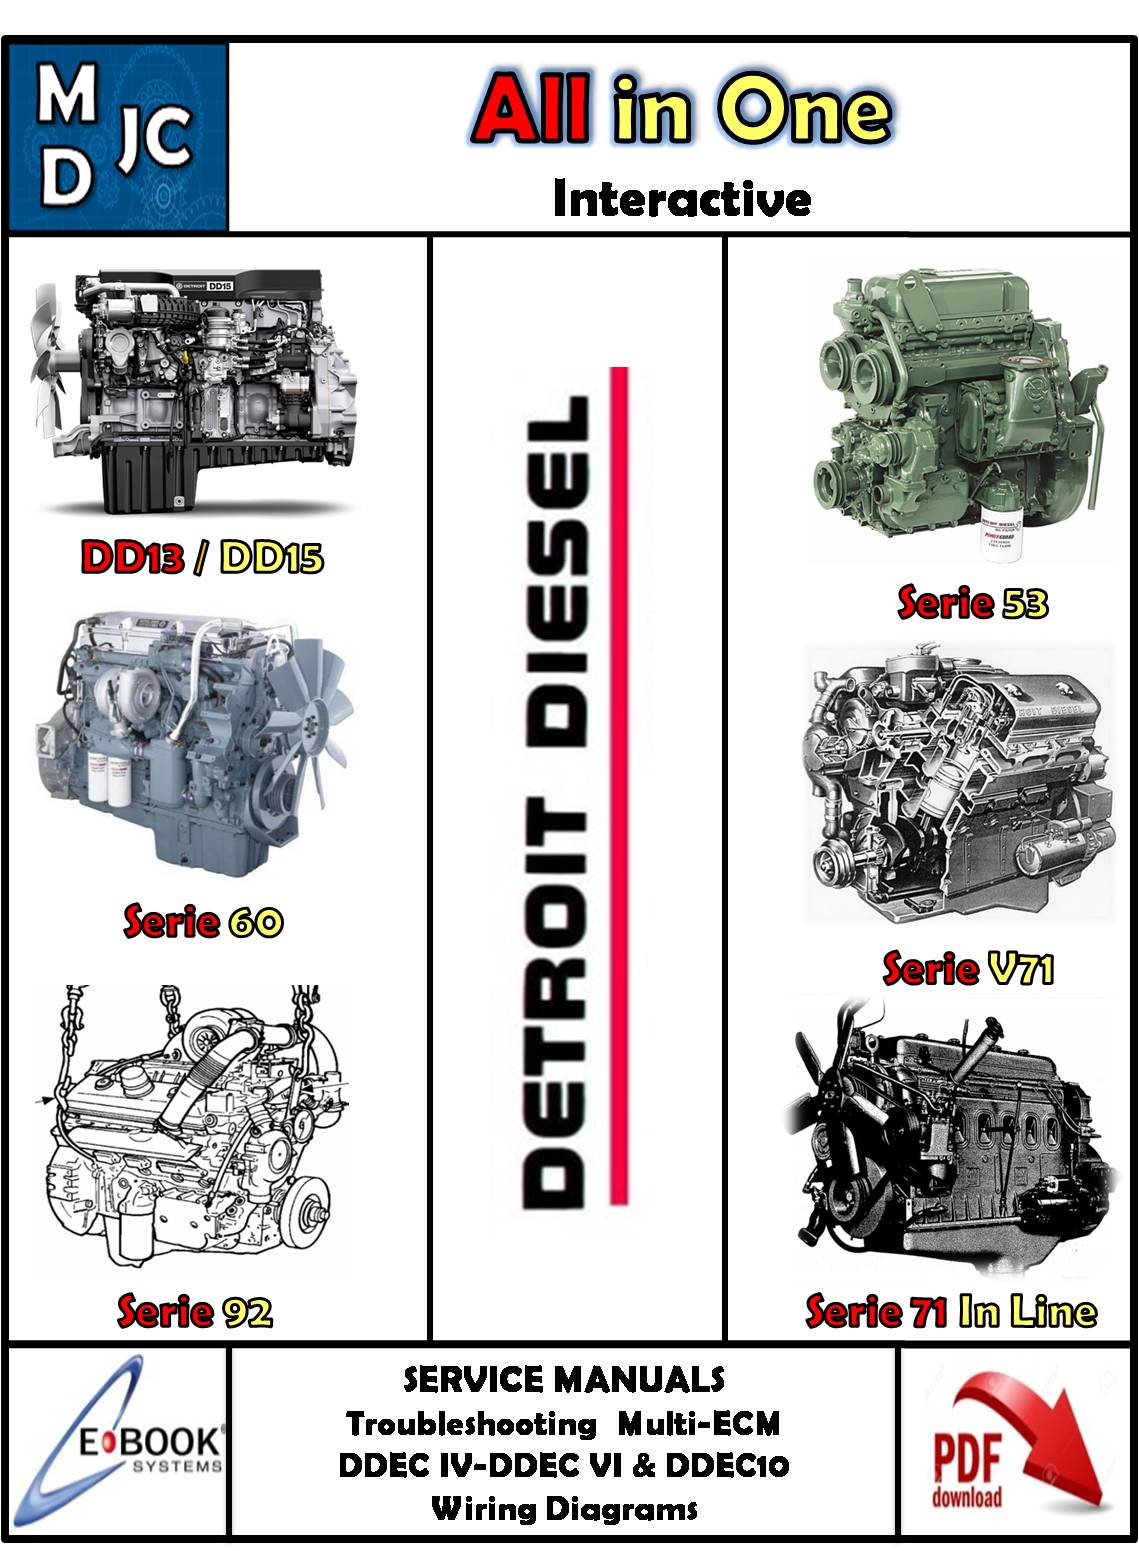 Detroit Diesel - All in One - Manual Interactivo